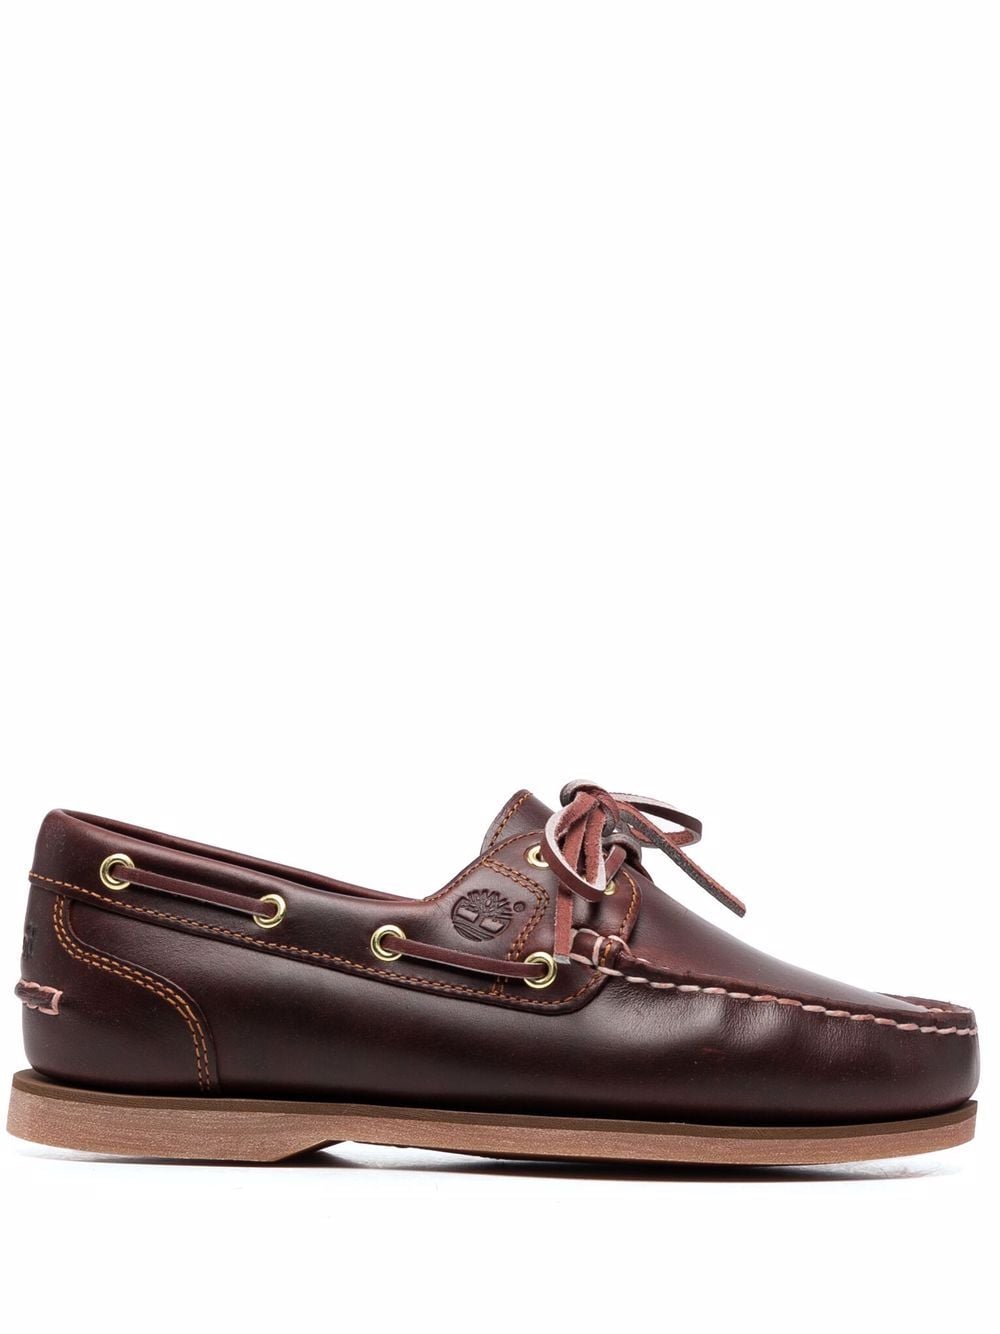 Brown leather Classic Boat 2-Eye leather shoes